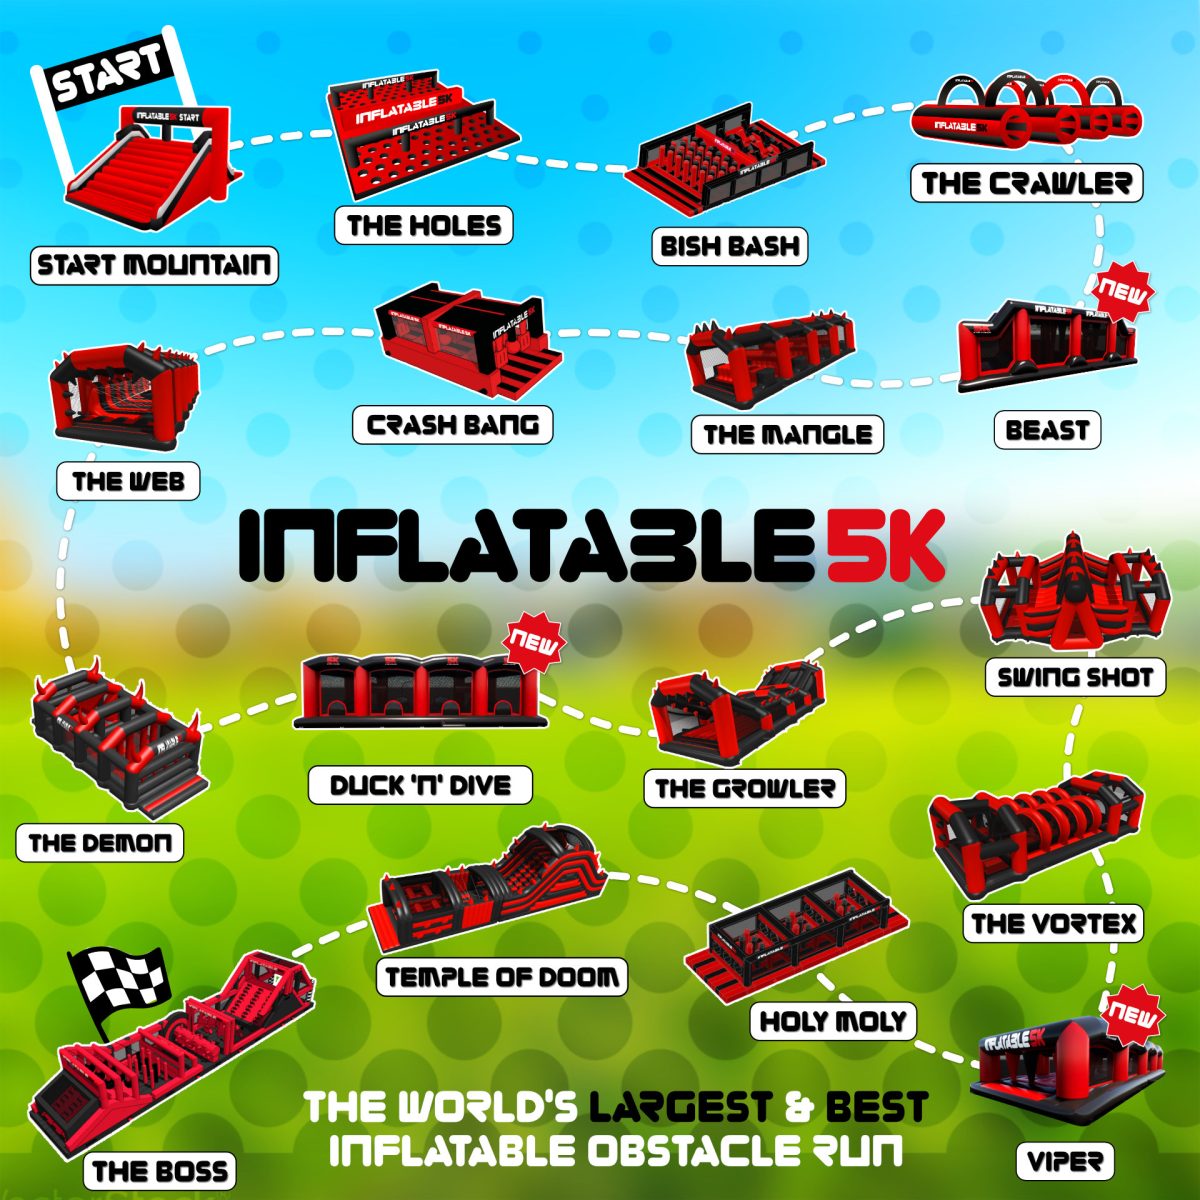 Graphic showing the different obstacles and the route of the 2022 Bristol Inflatable 5k